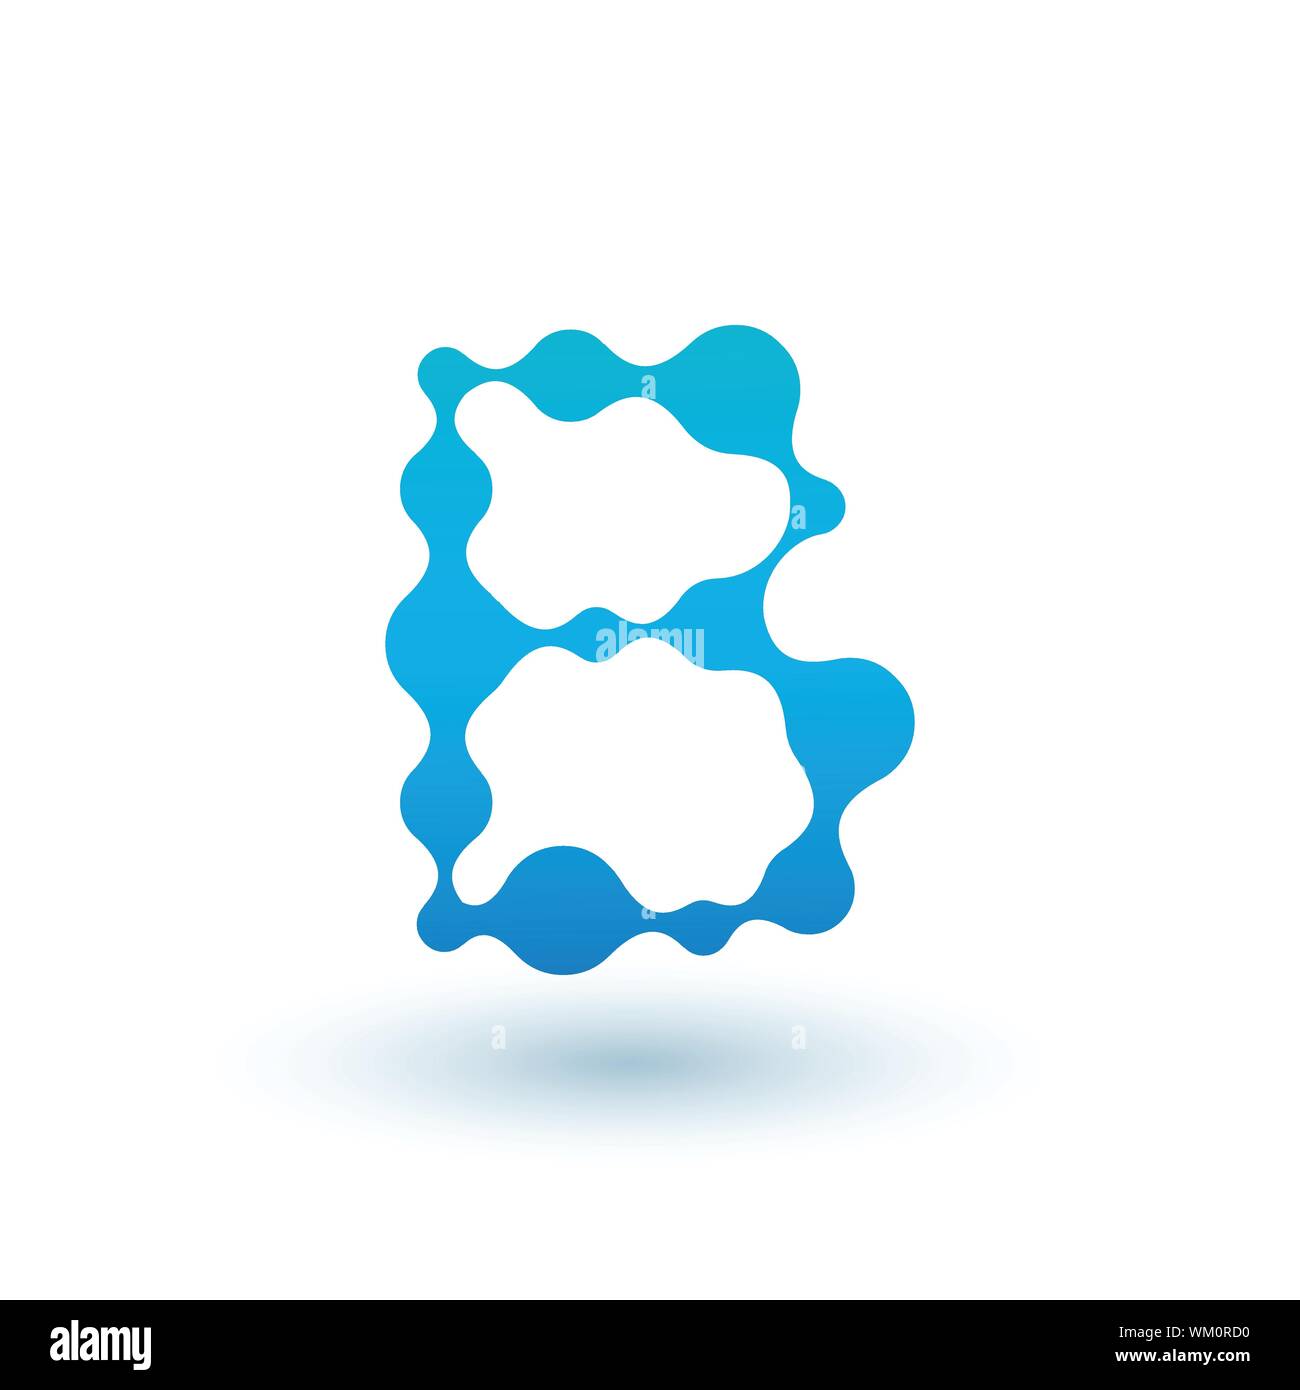 Water molecular initial Letter B Logo design, Fluid liquid Design Element with Dots and shadow. Stock vector illustration isolated on white background Stock Vector